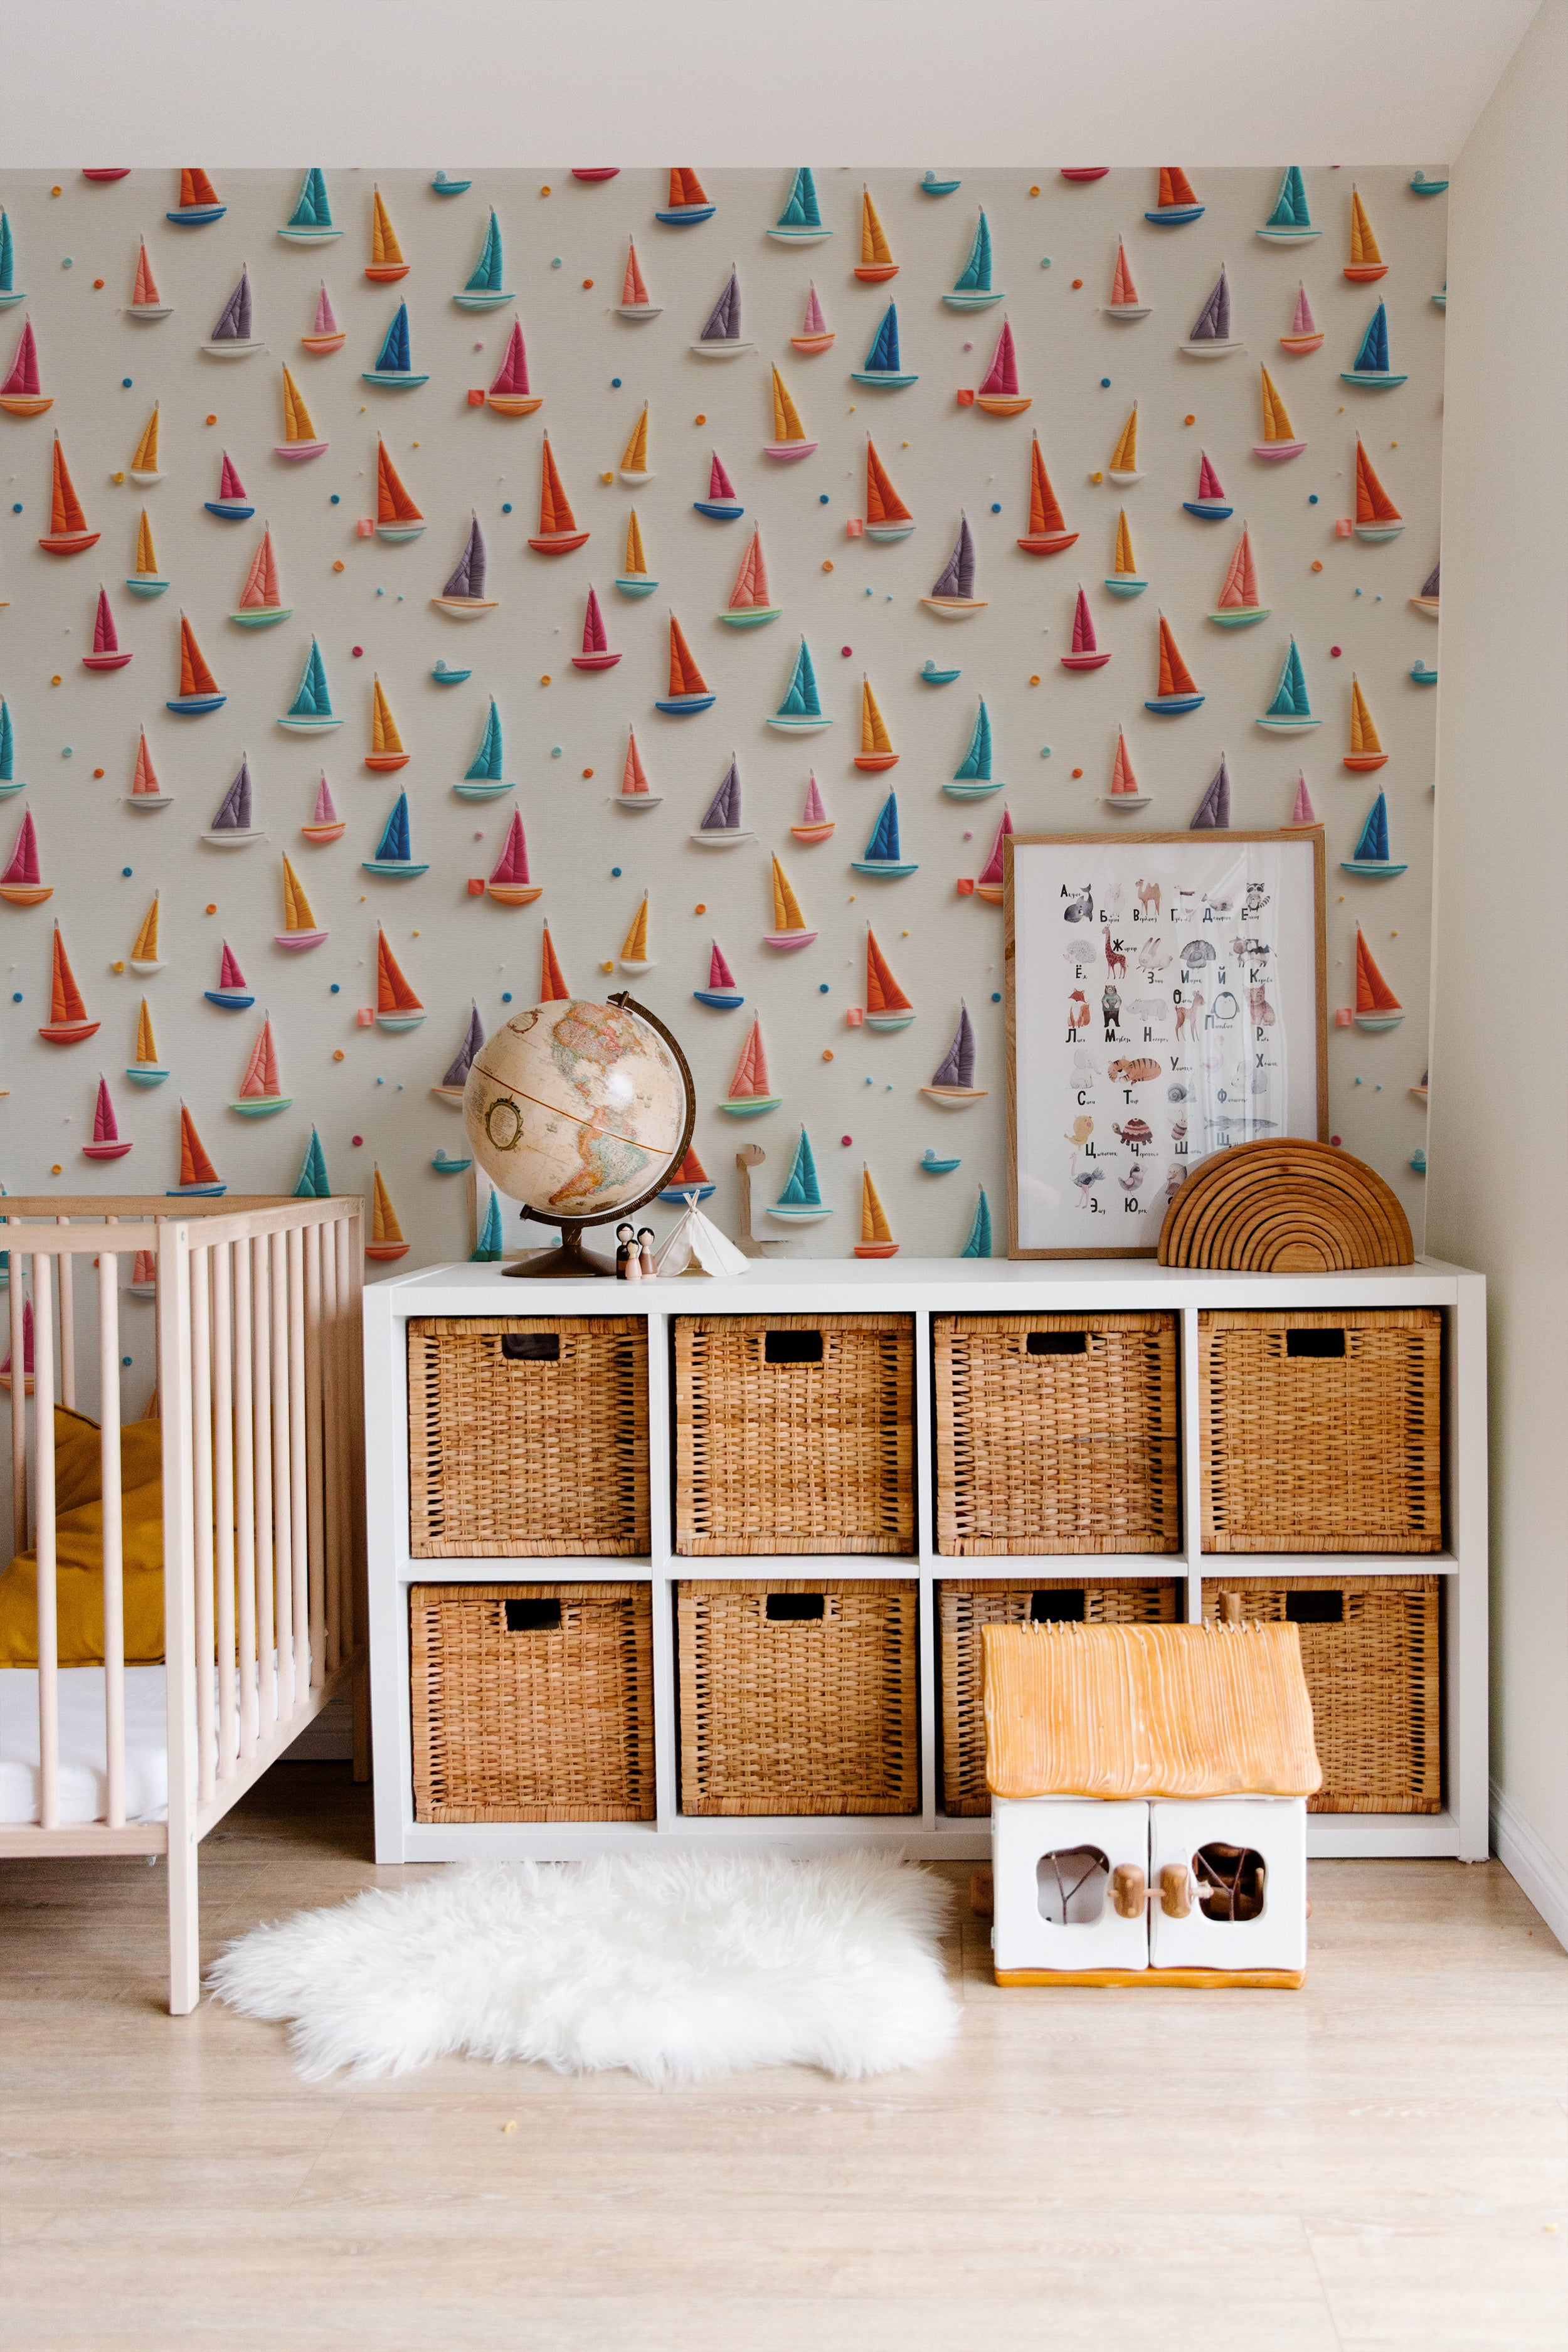 A nursery room with the 'Tidal Sail Wallpaper' enhancing a cheerful and playful environment. The room includes a baby's crib, wooden storage units, and a cozy white fur rug, creating a warm and inviting space.